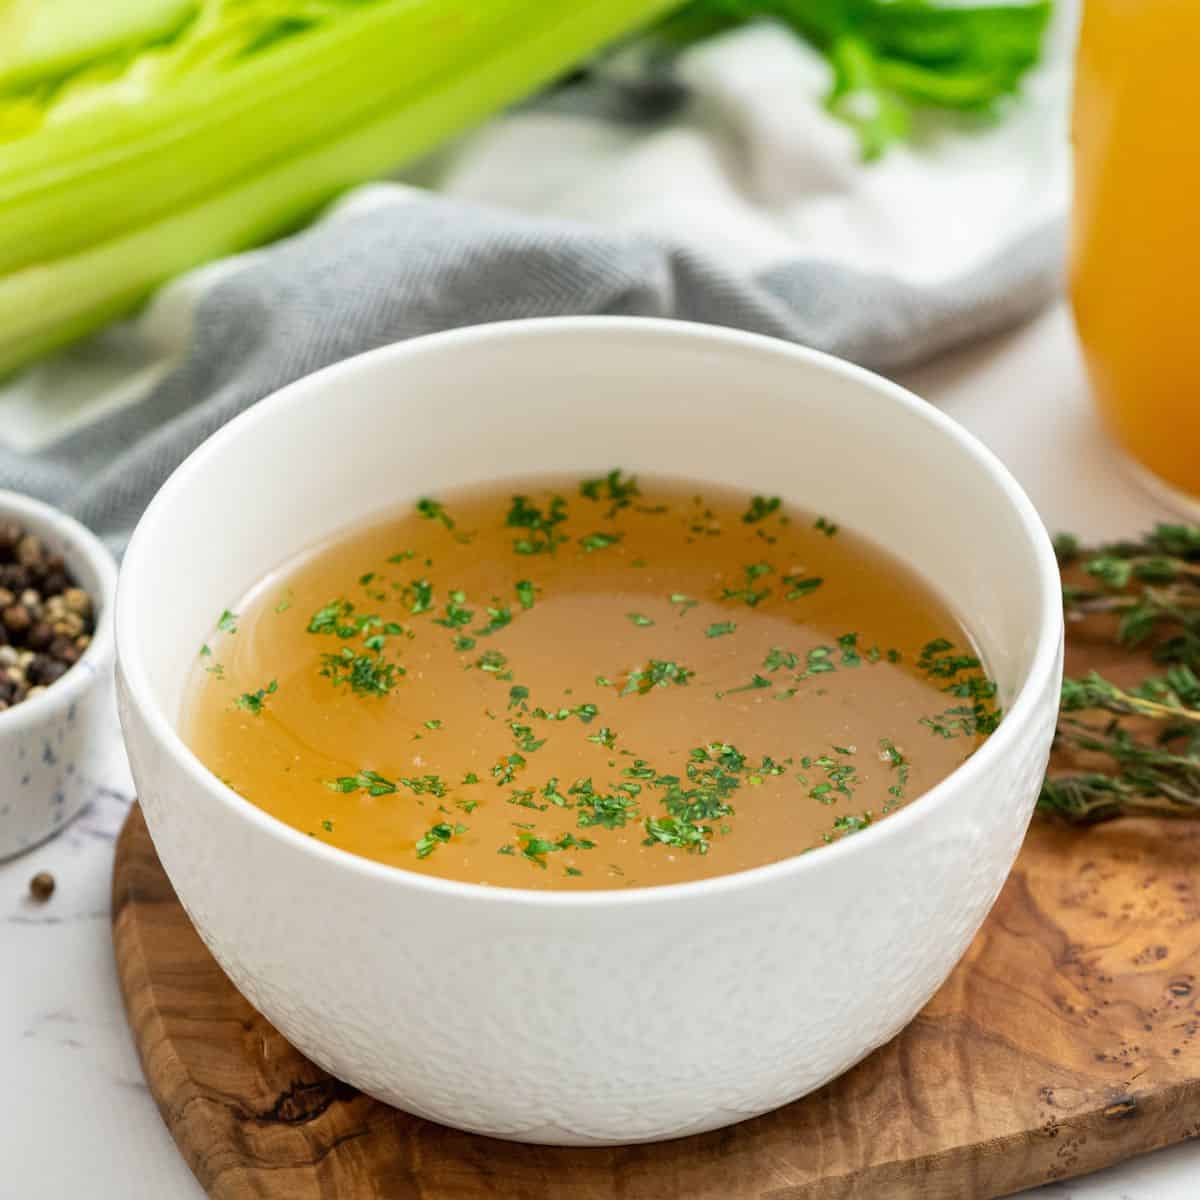 How to Freeze Leftover Chicken Broth or Stock